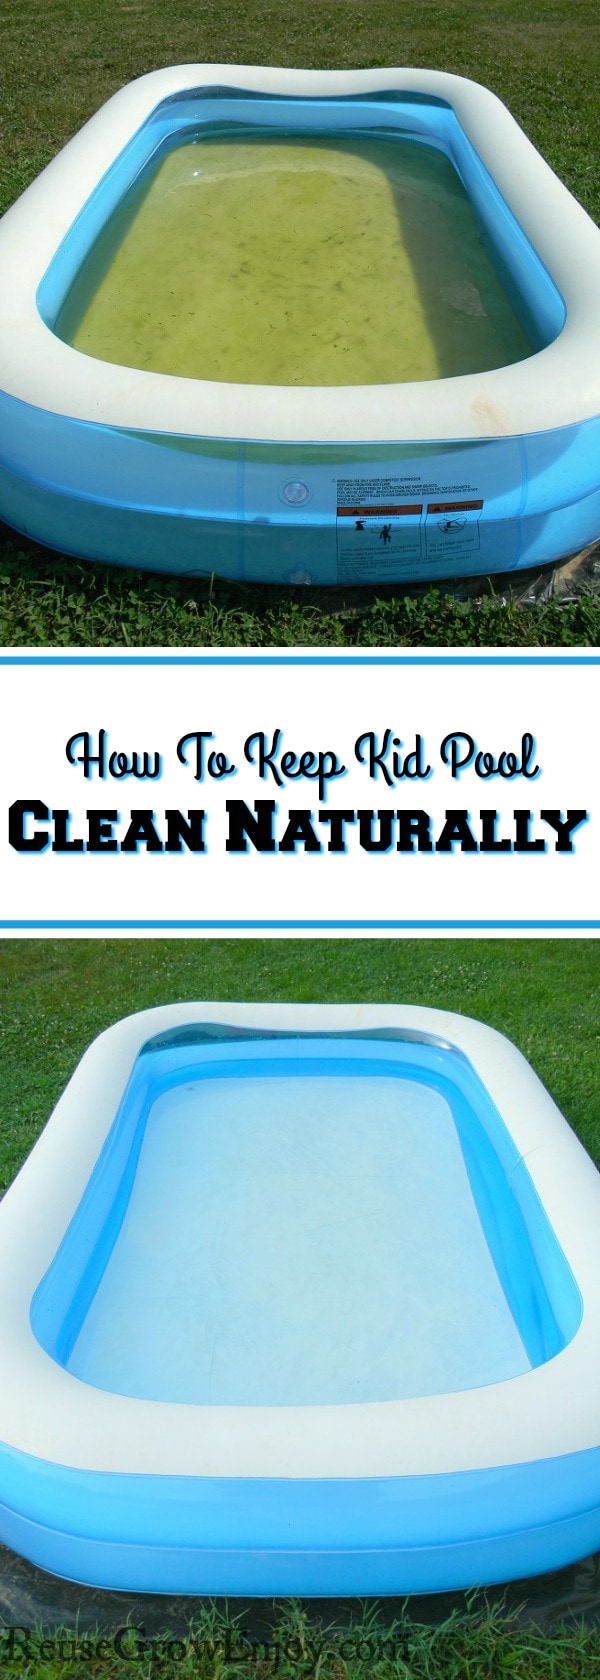 trade legation Furnace How To Keep A Kid Pool Clean Naturally Without Chemicals - Reuse Grow Enjoy